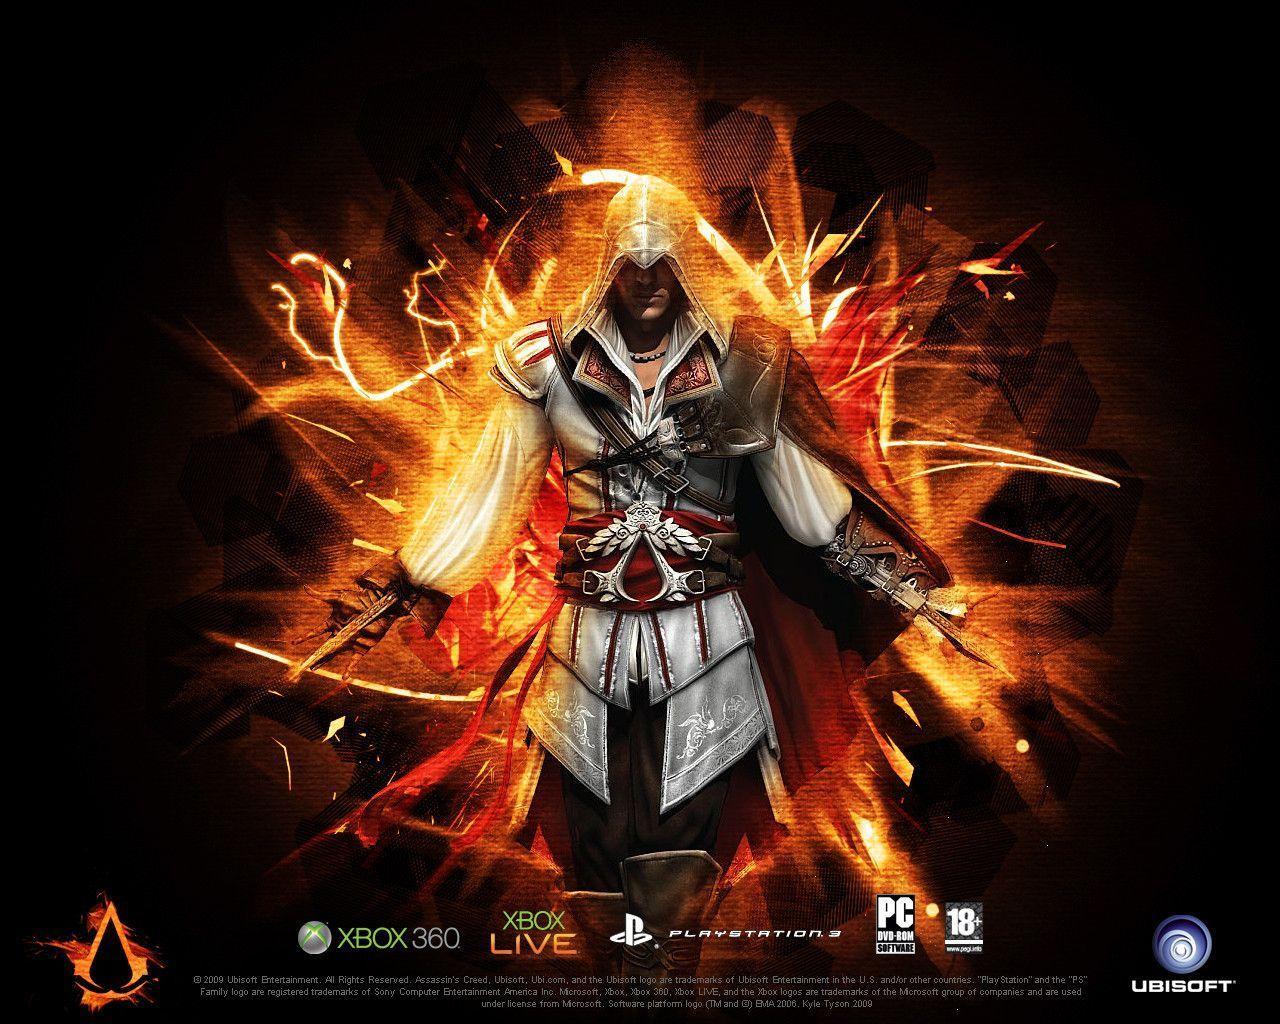 Assassin&;s Creed II Wallpaper. Assassin&;s Creed II Background